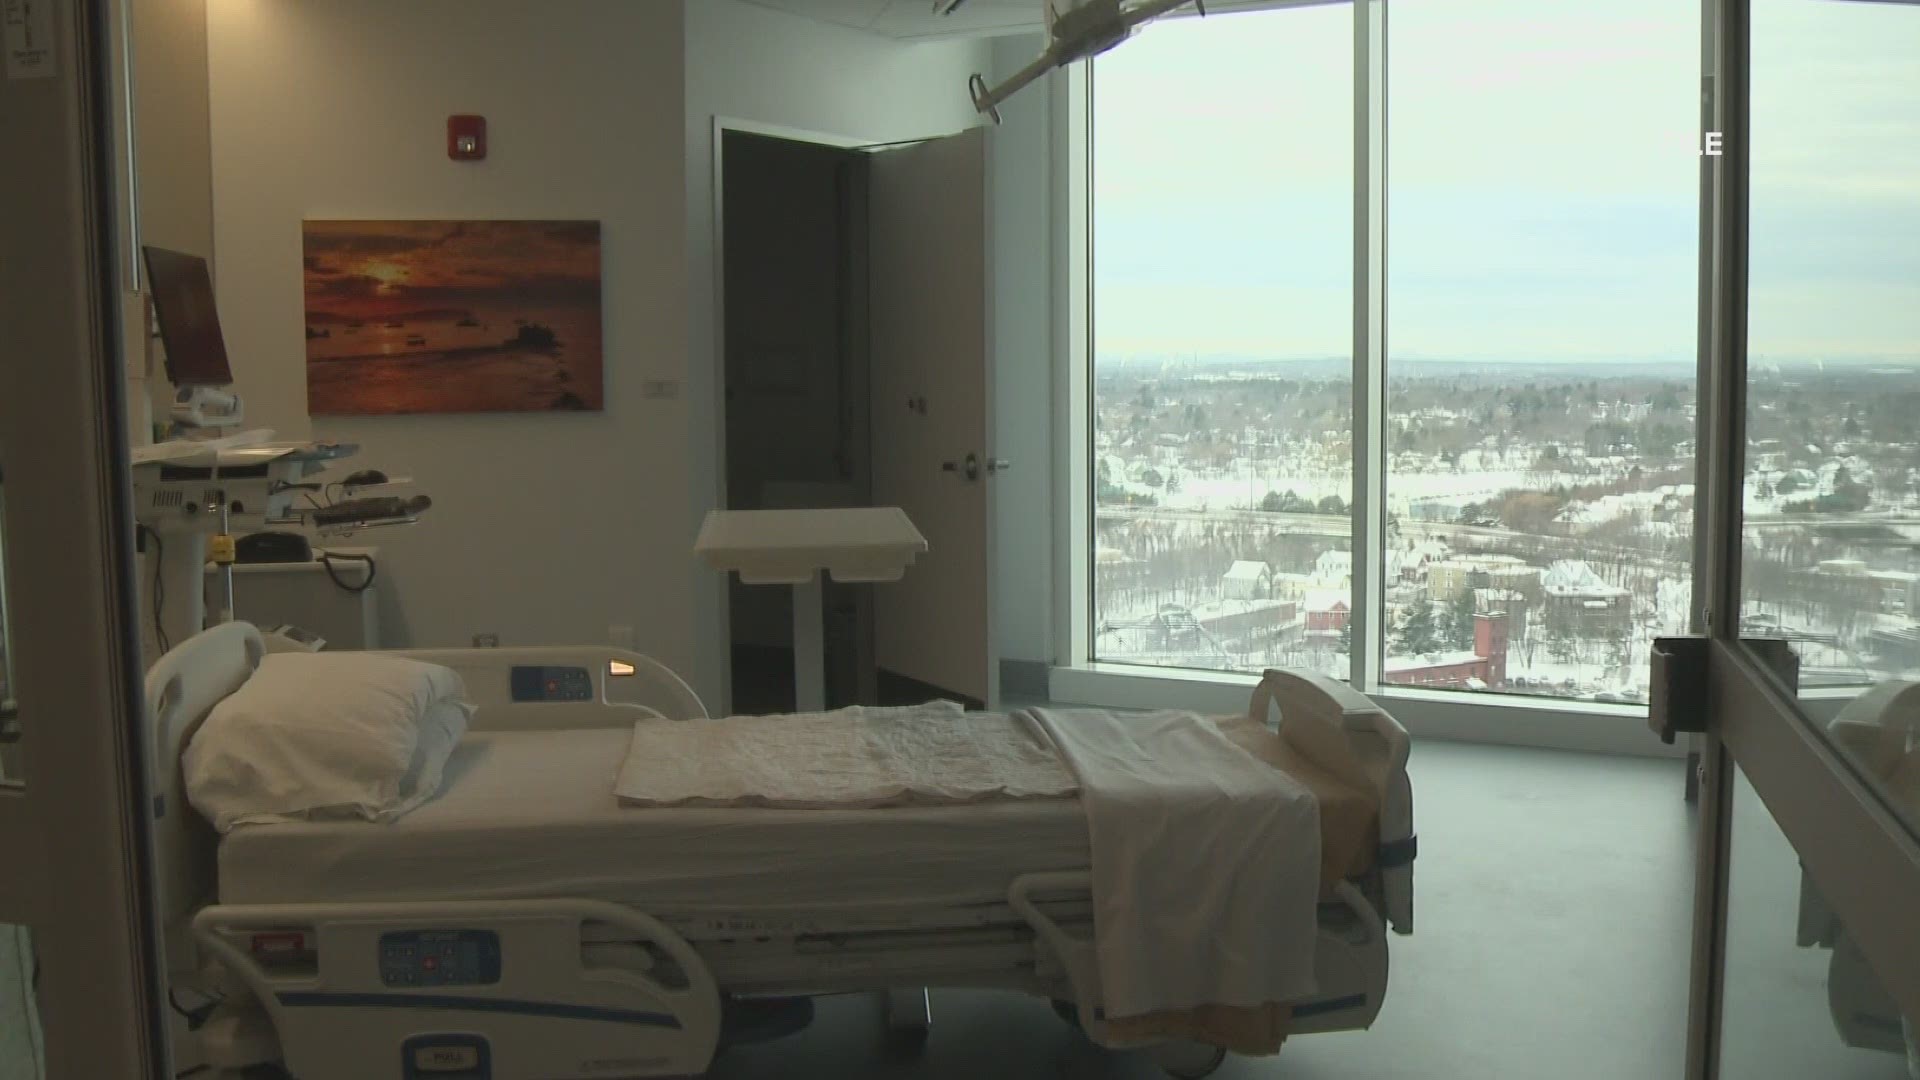 A Maine nurse shares his story after being attacked by a patient while on the job.